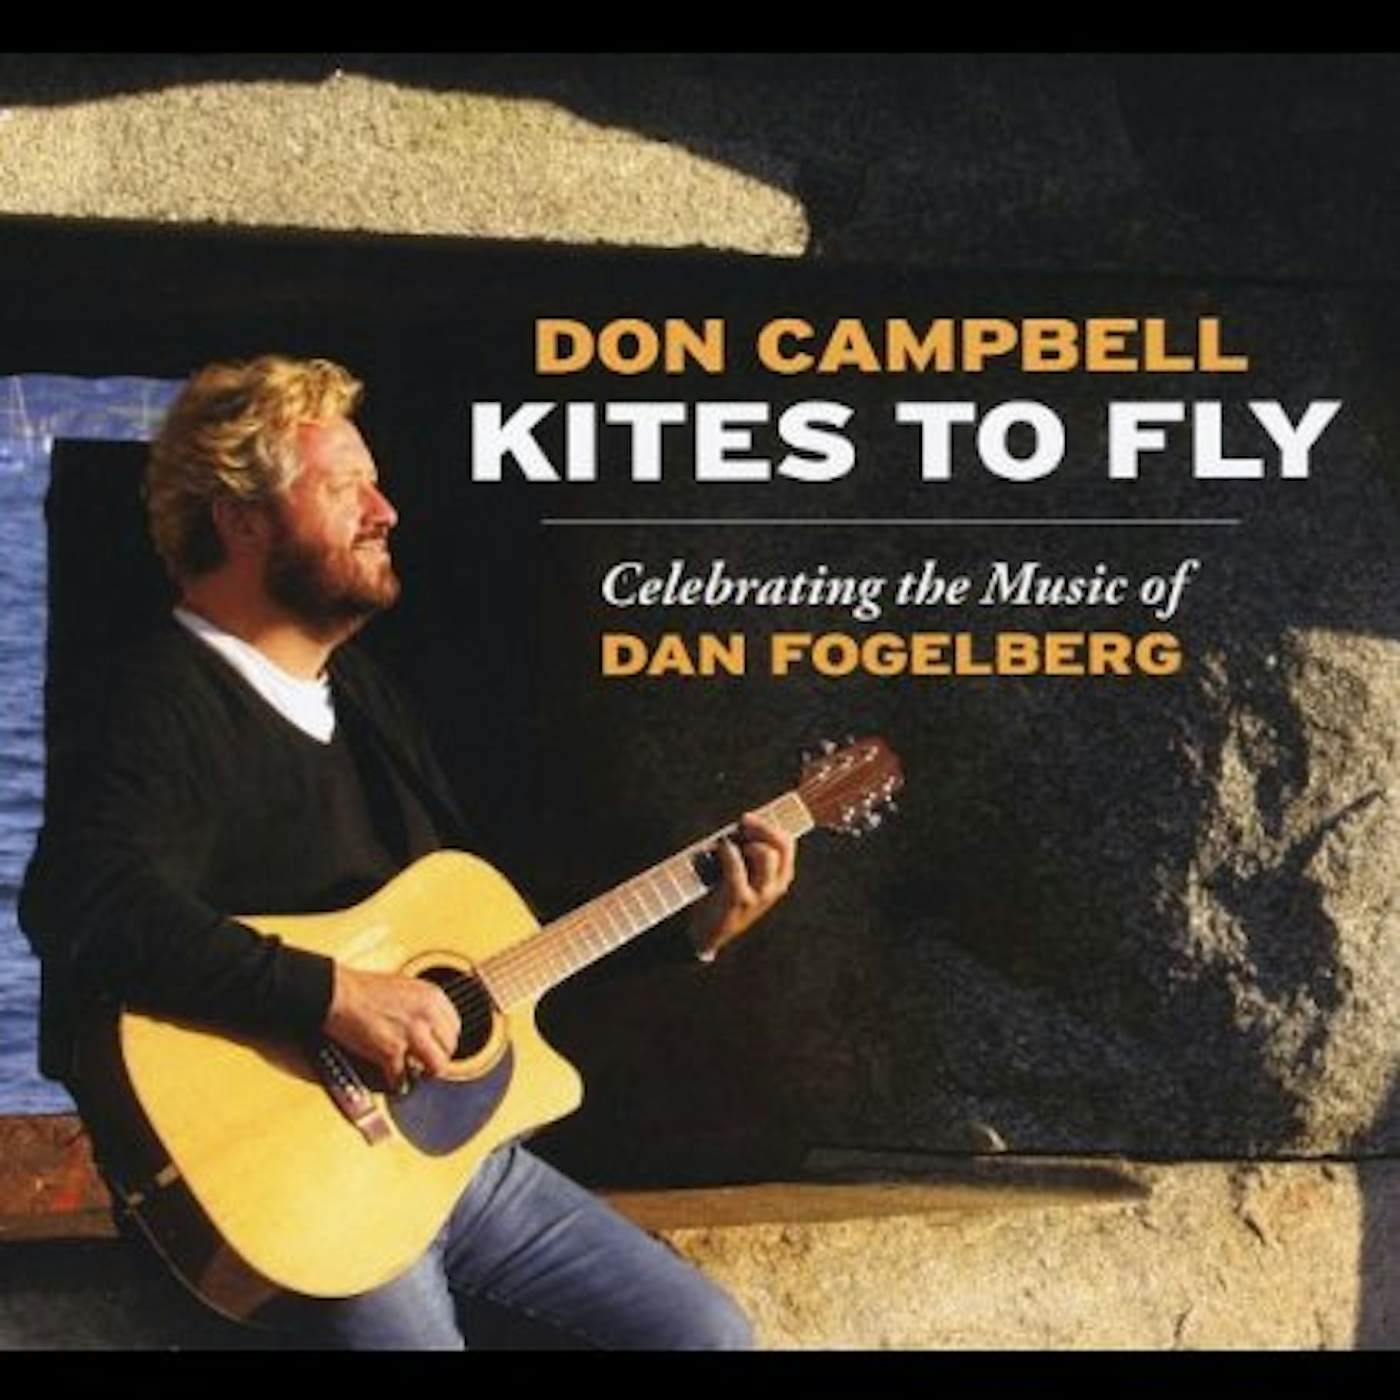 Don Campbell KITES TO FLY: CELEBRATING MUSIC OF DAN FOGELBERG CD